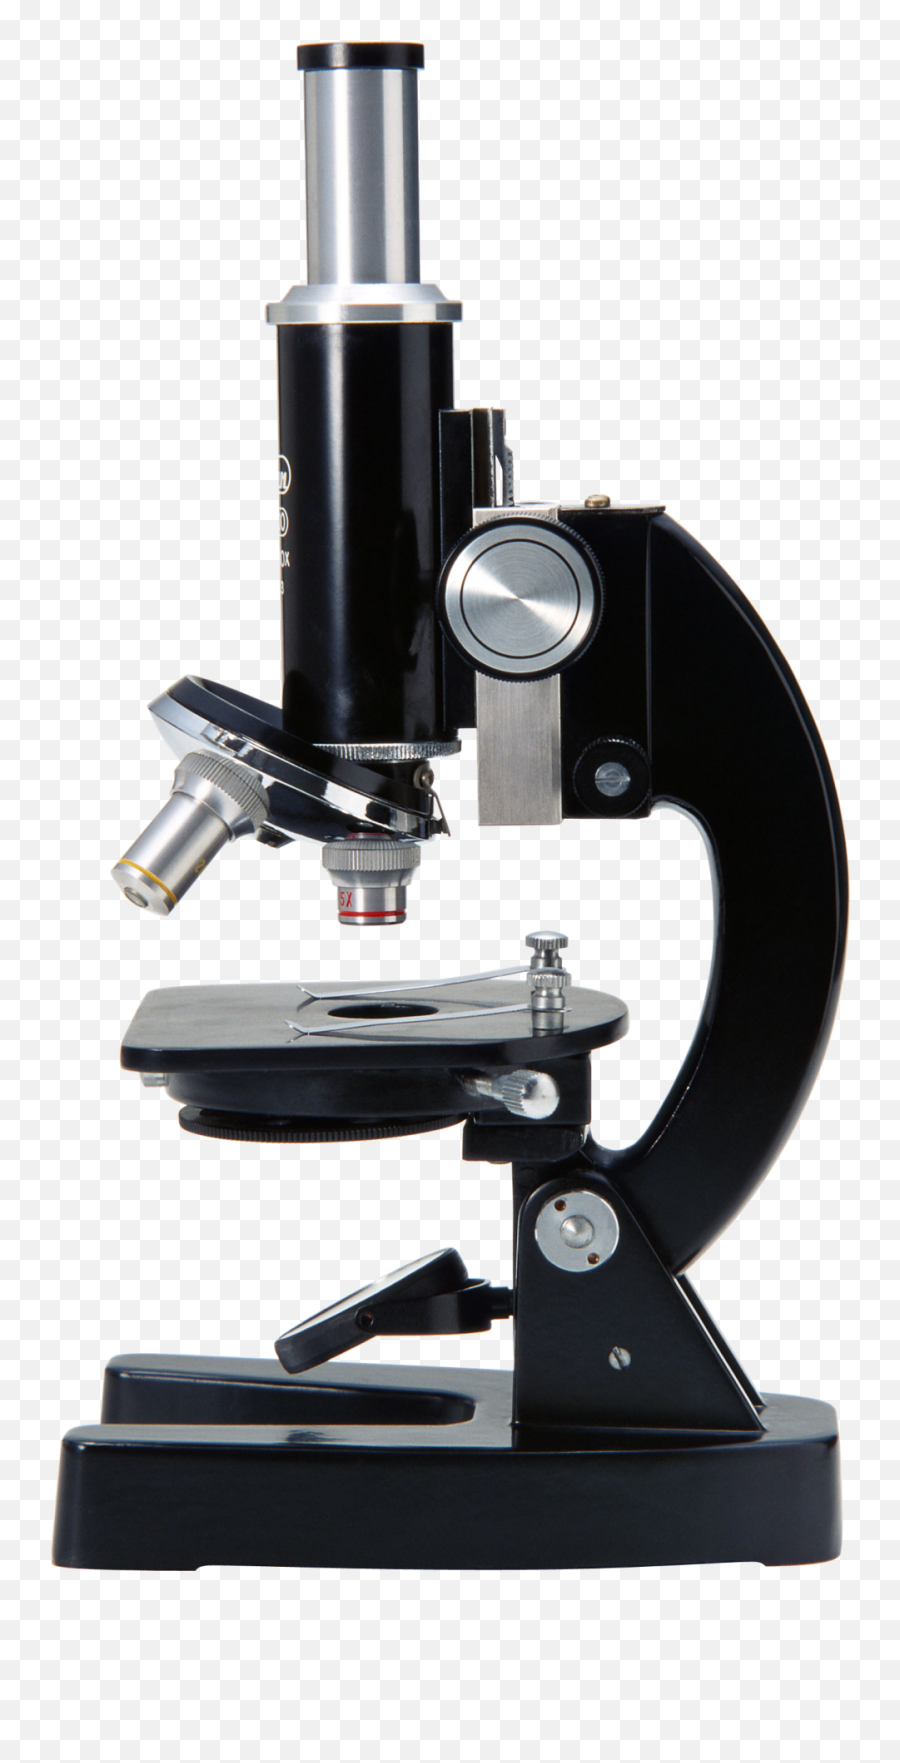 Microscope Png Image - Transparent Background Microscope Png,Microscope Transparent Background